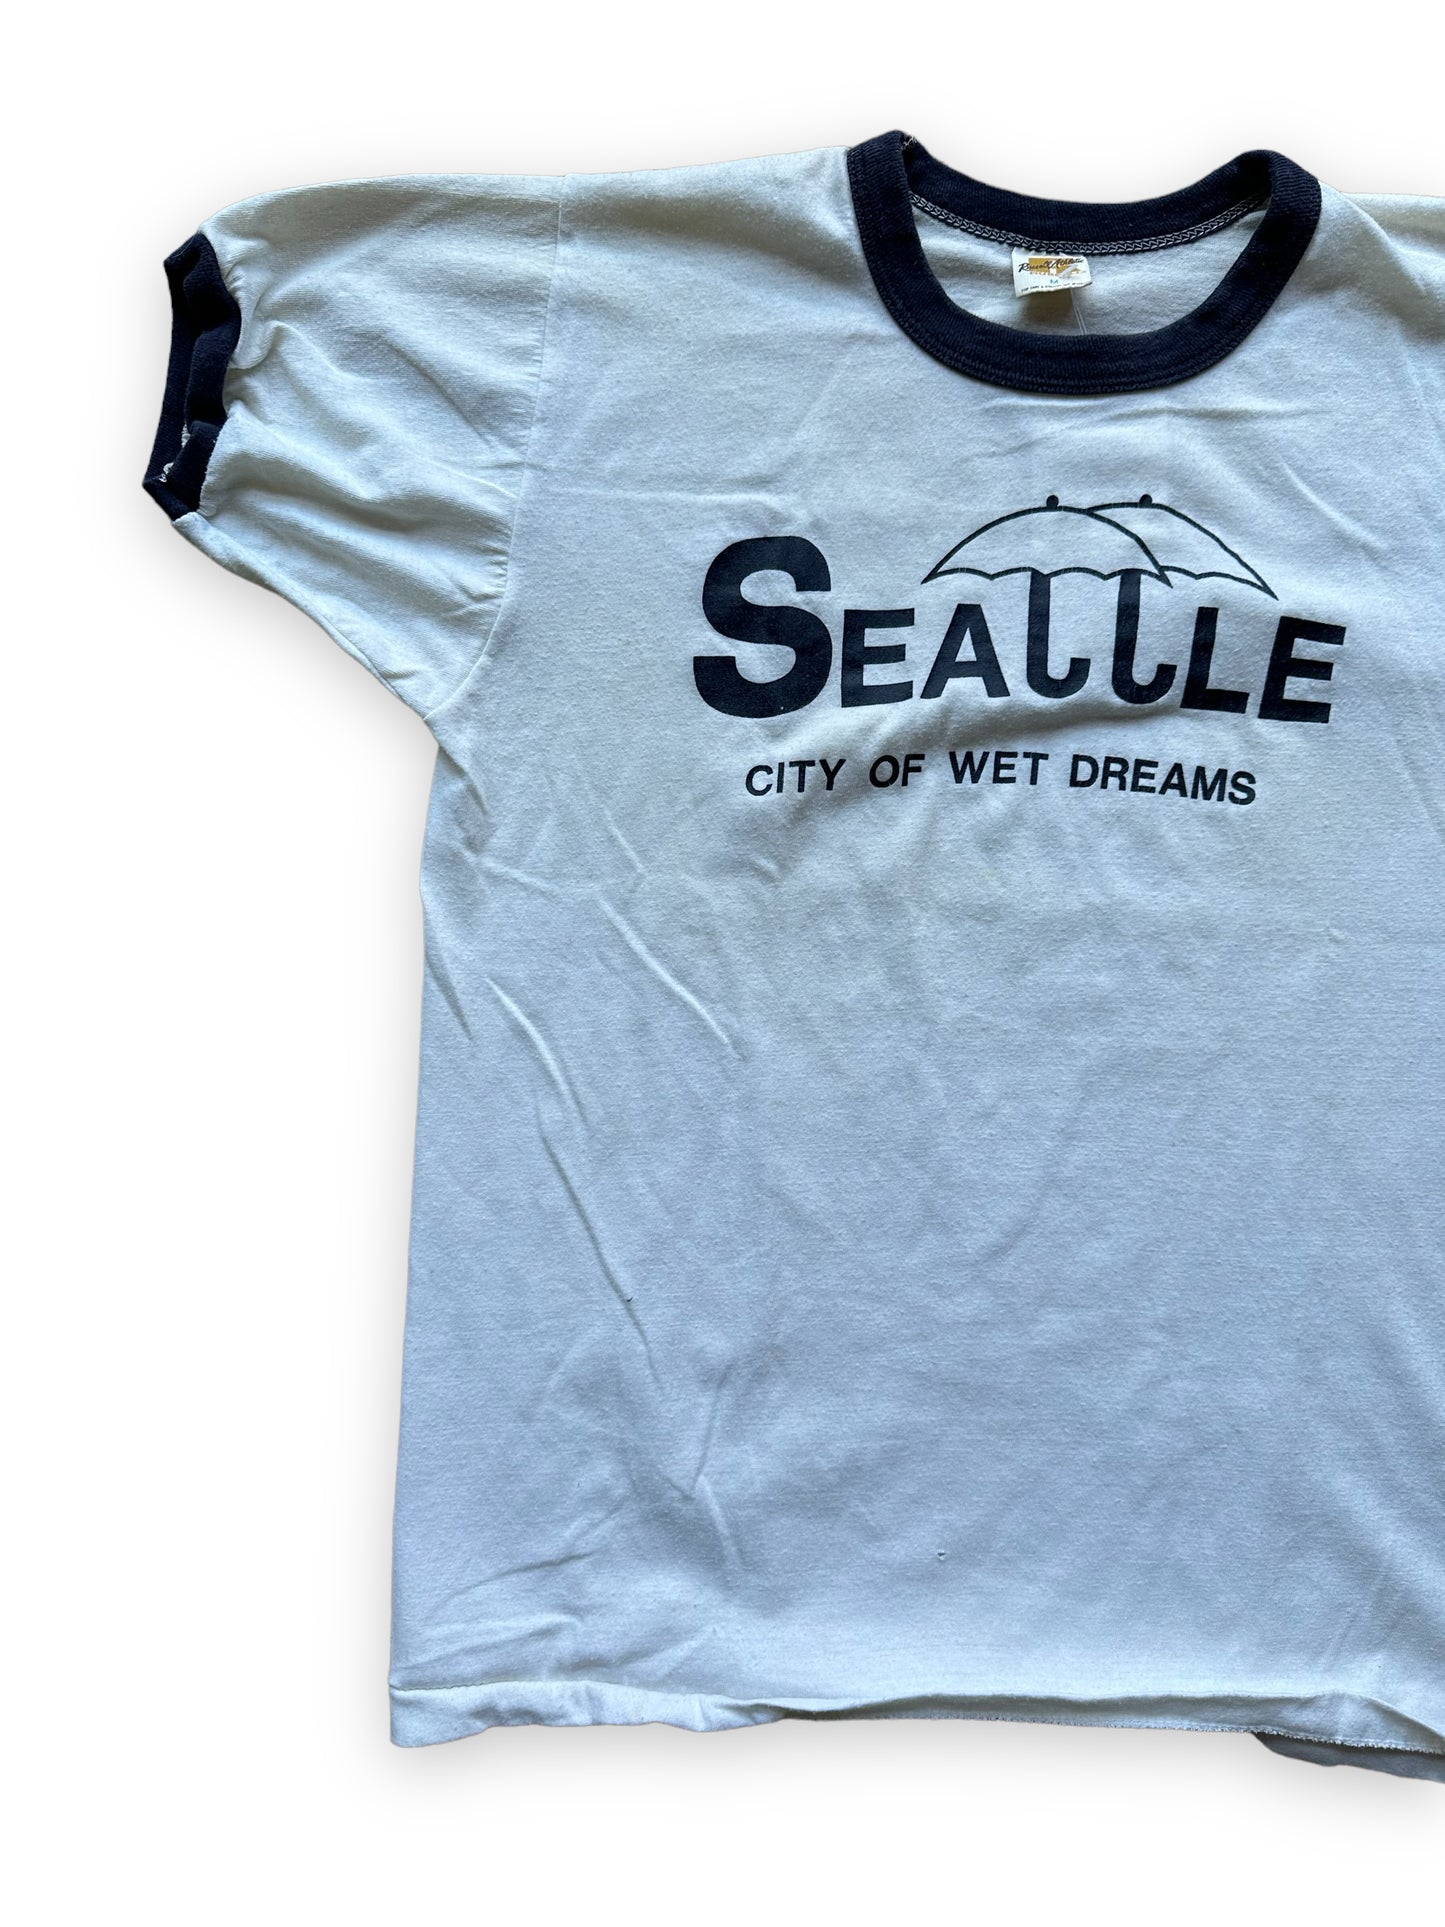 Right Front View of Vintage Seattle City of Wet Dreams Ringer Tee SZ M |  Vintage Russell Athletic T Shirt | Barn Owl Vintage Seattle